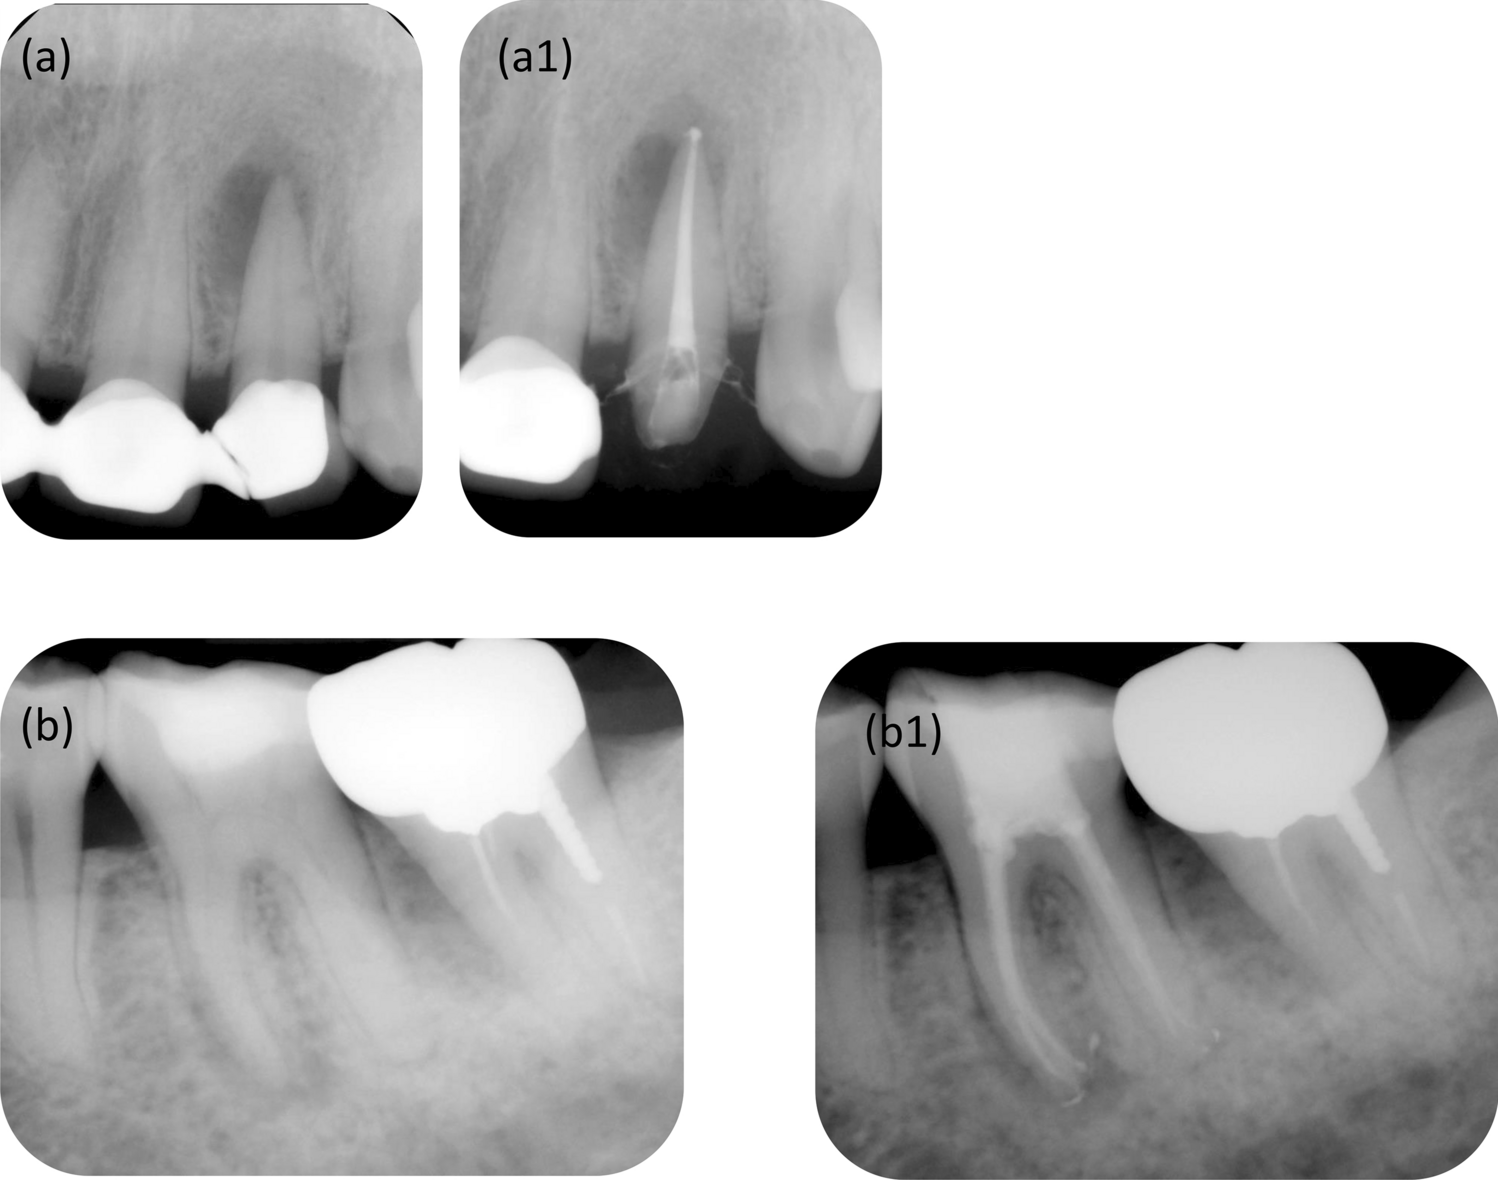 Postoperative pain of minimally invasive root canal treatment:a randomized clinical trial